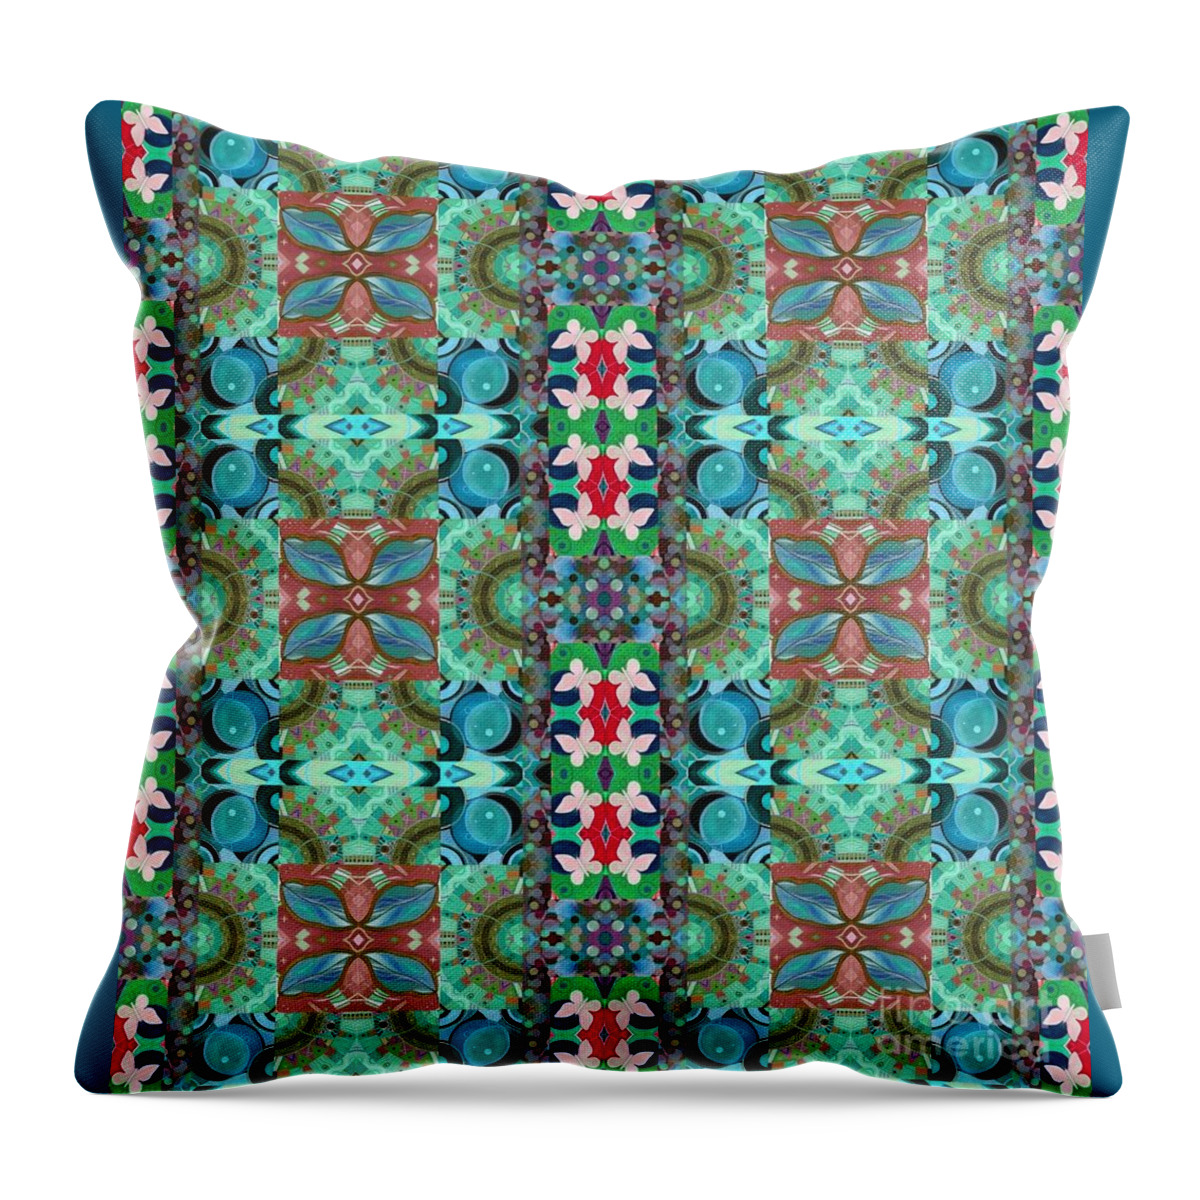 Charmed 2 By Helena Tiainen Throw Pillow featuring the painting Charmed 2 by Helena Tiainen